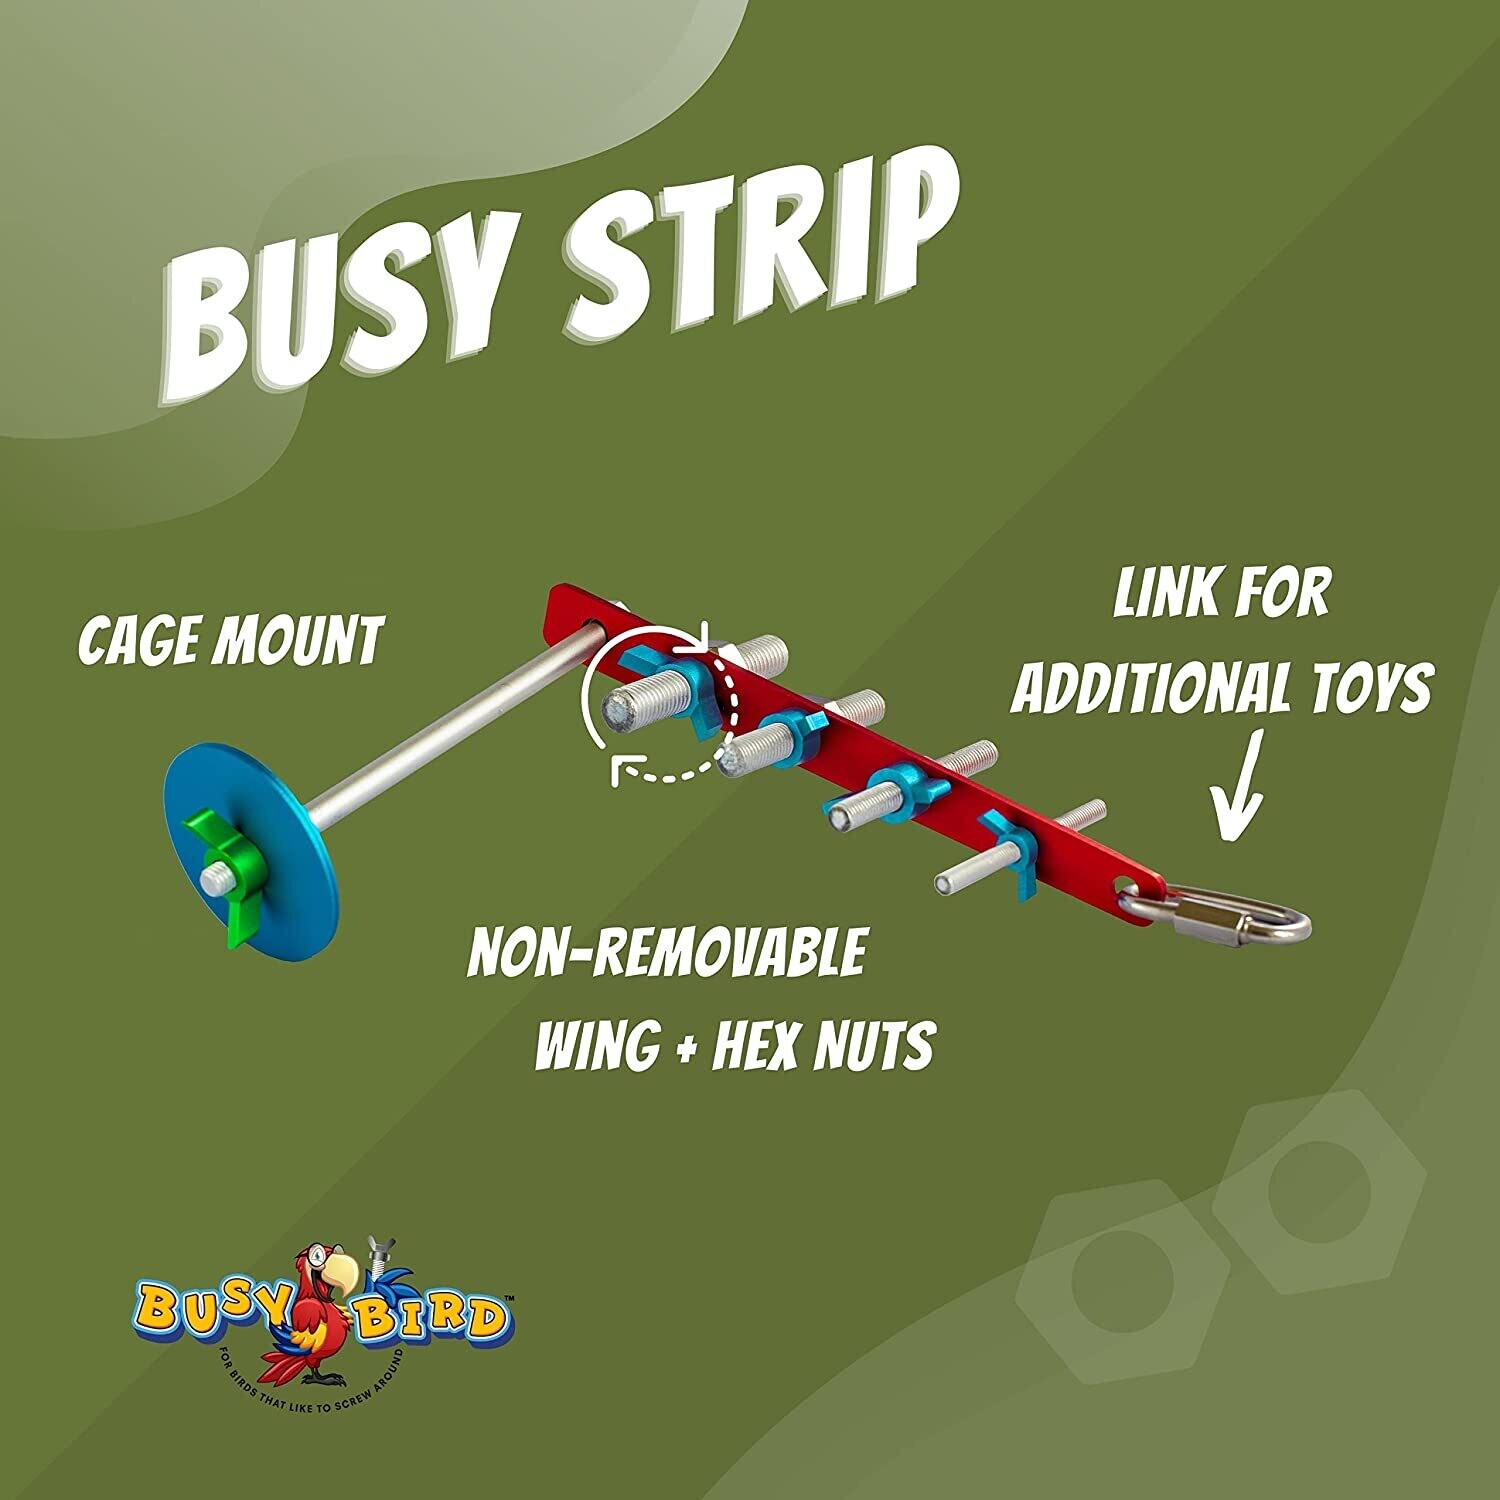 The Busy Strip - 4 threaded bolts, wing nuts, hex nuts, leash clip, hanger assembly - Challenge your bird with 12 total inches of threaded rod and non-removable hex & wing nuts for puzzling fun.